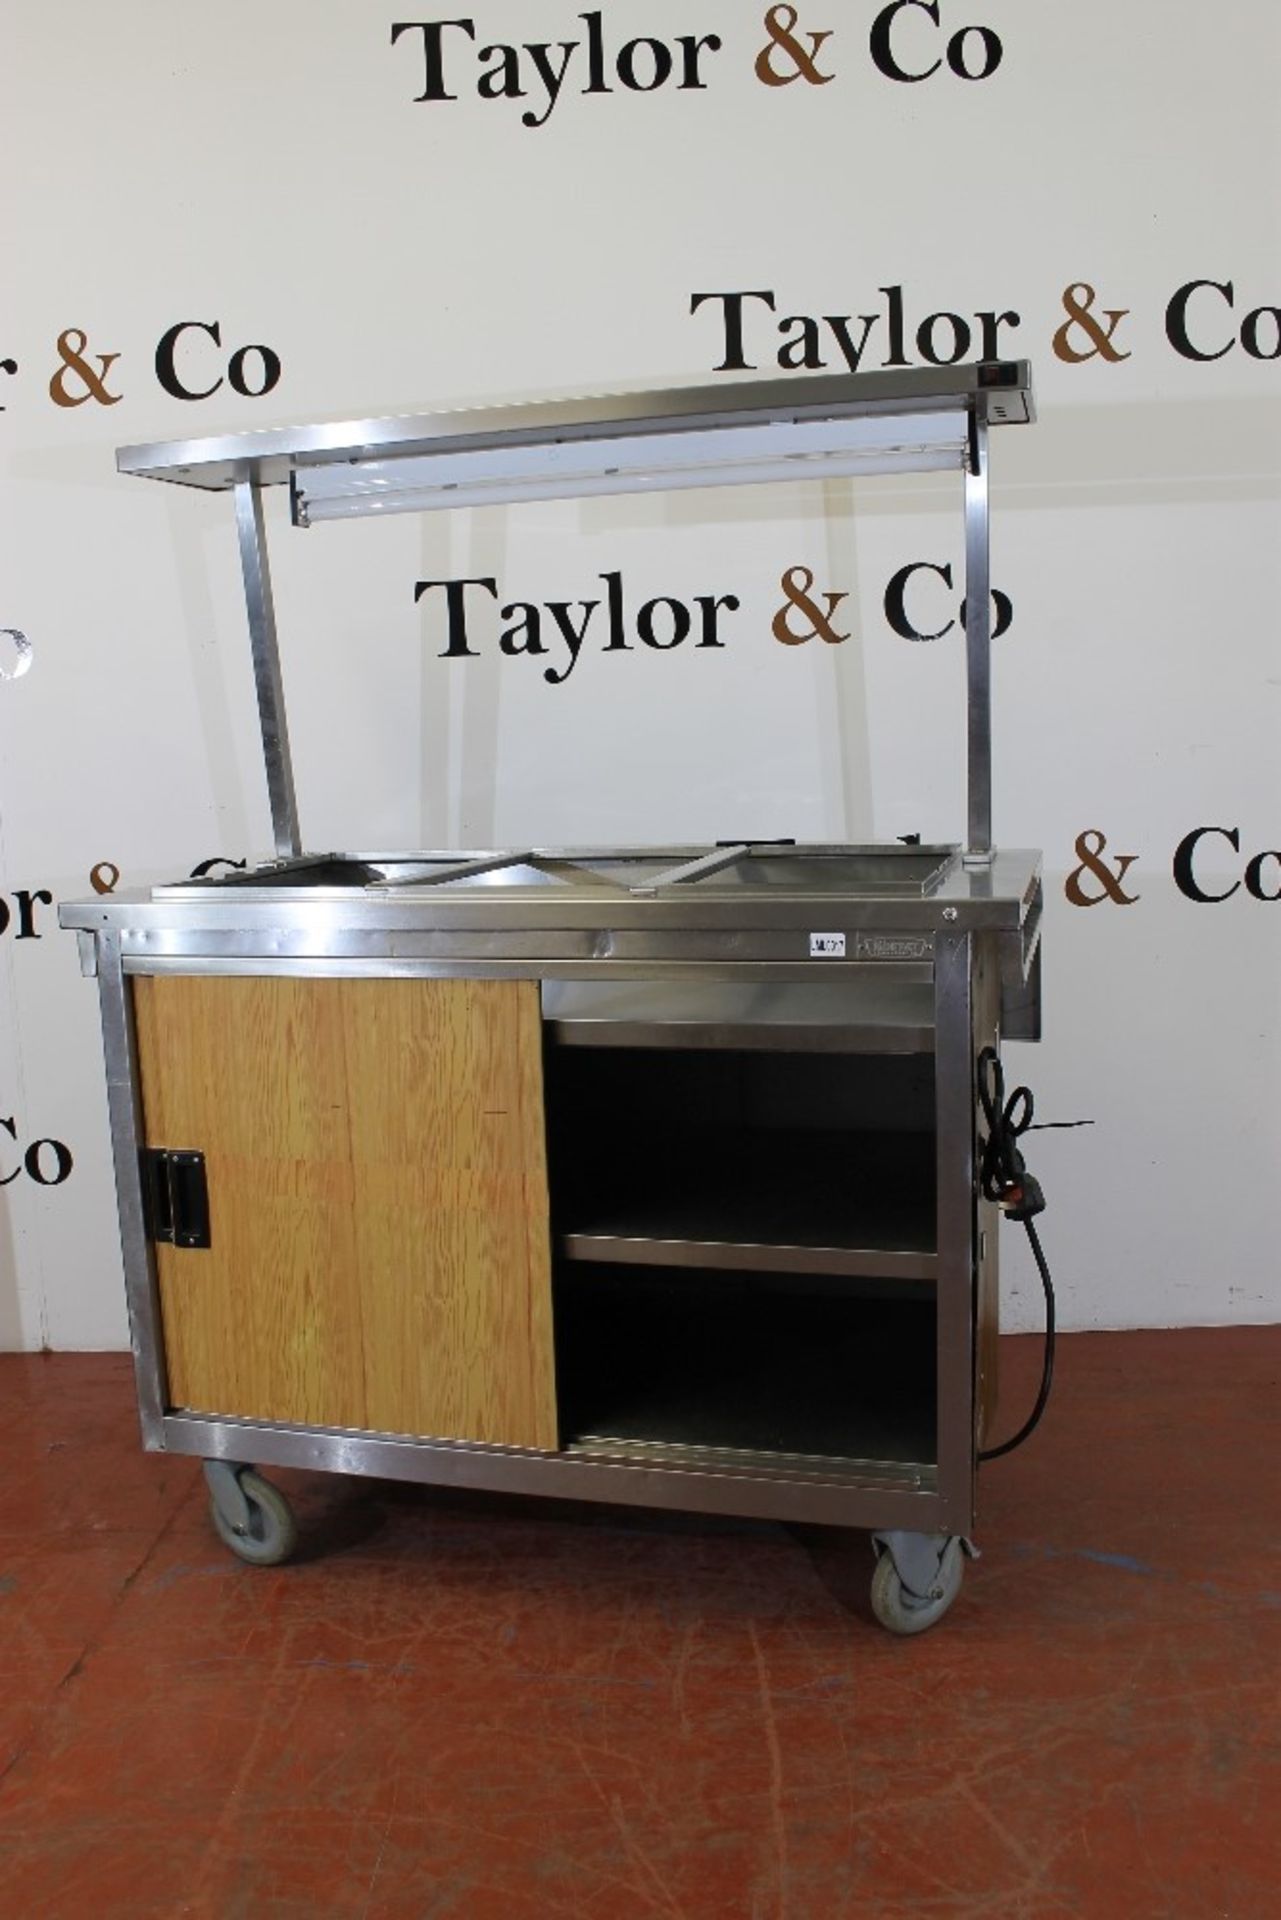 Moffatt Heated Three Tier Hot Cupboard with dry heat  - 3 x  1/1 Gastronorm Pans , Bain Marie – - Image 2 of 5